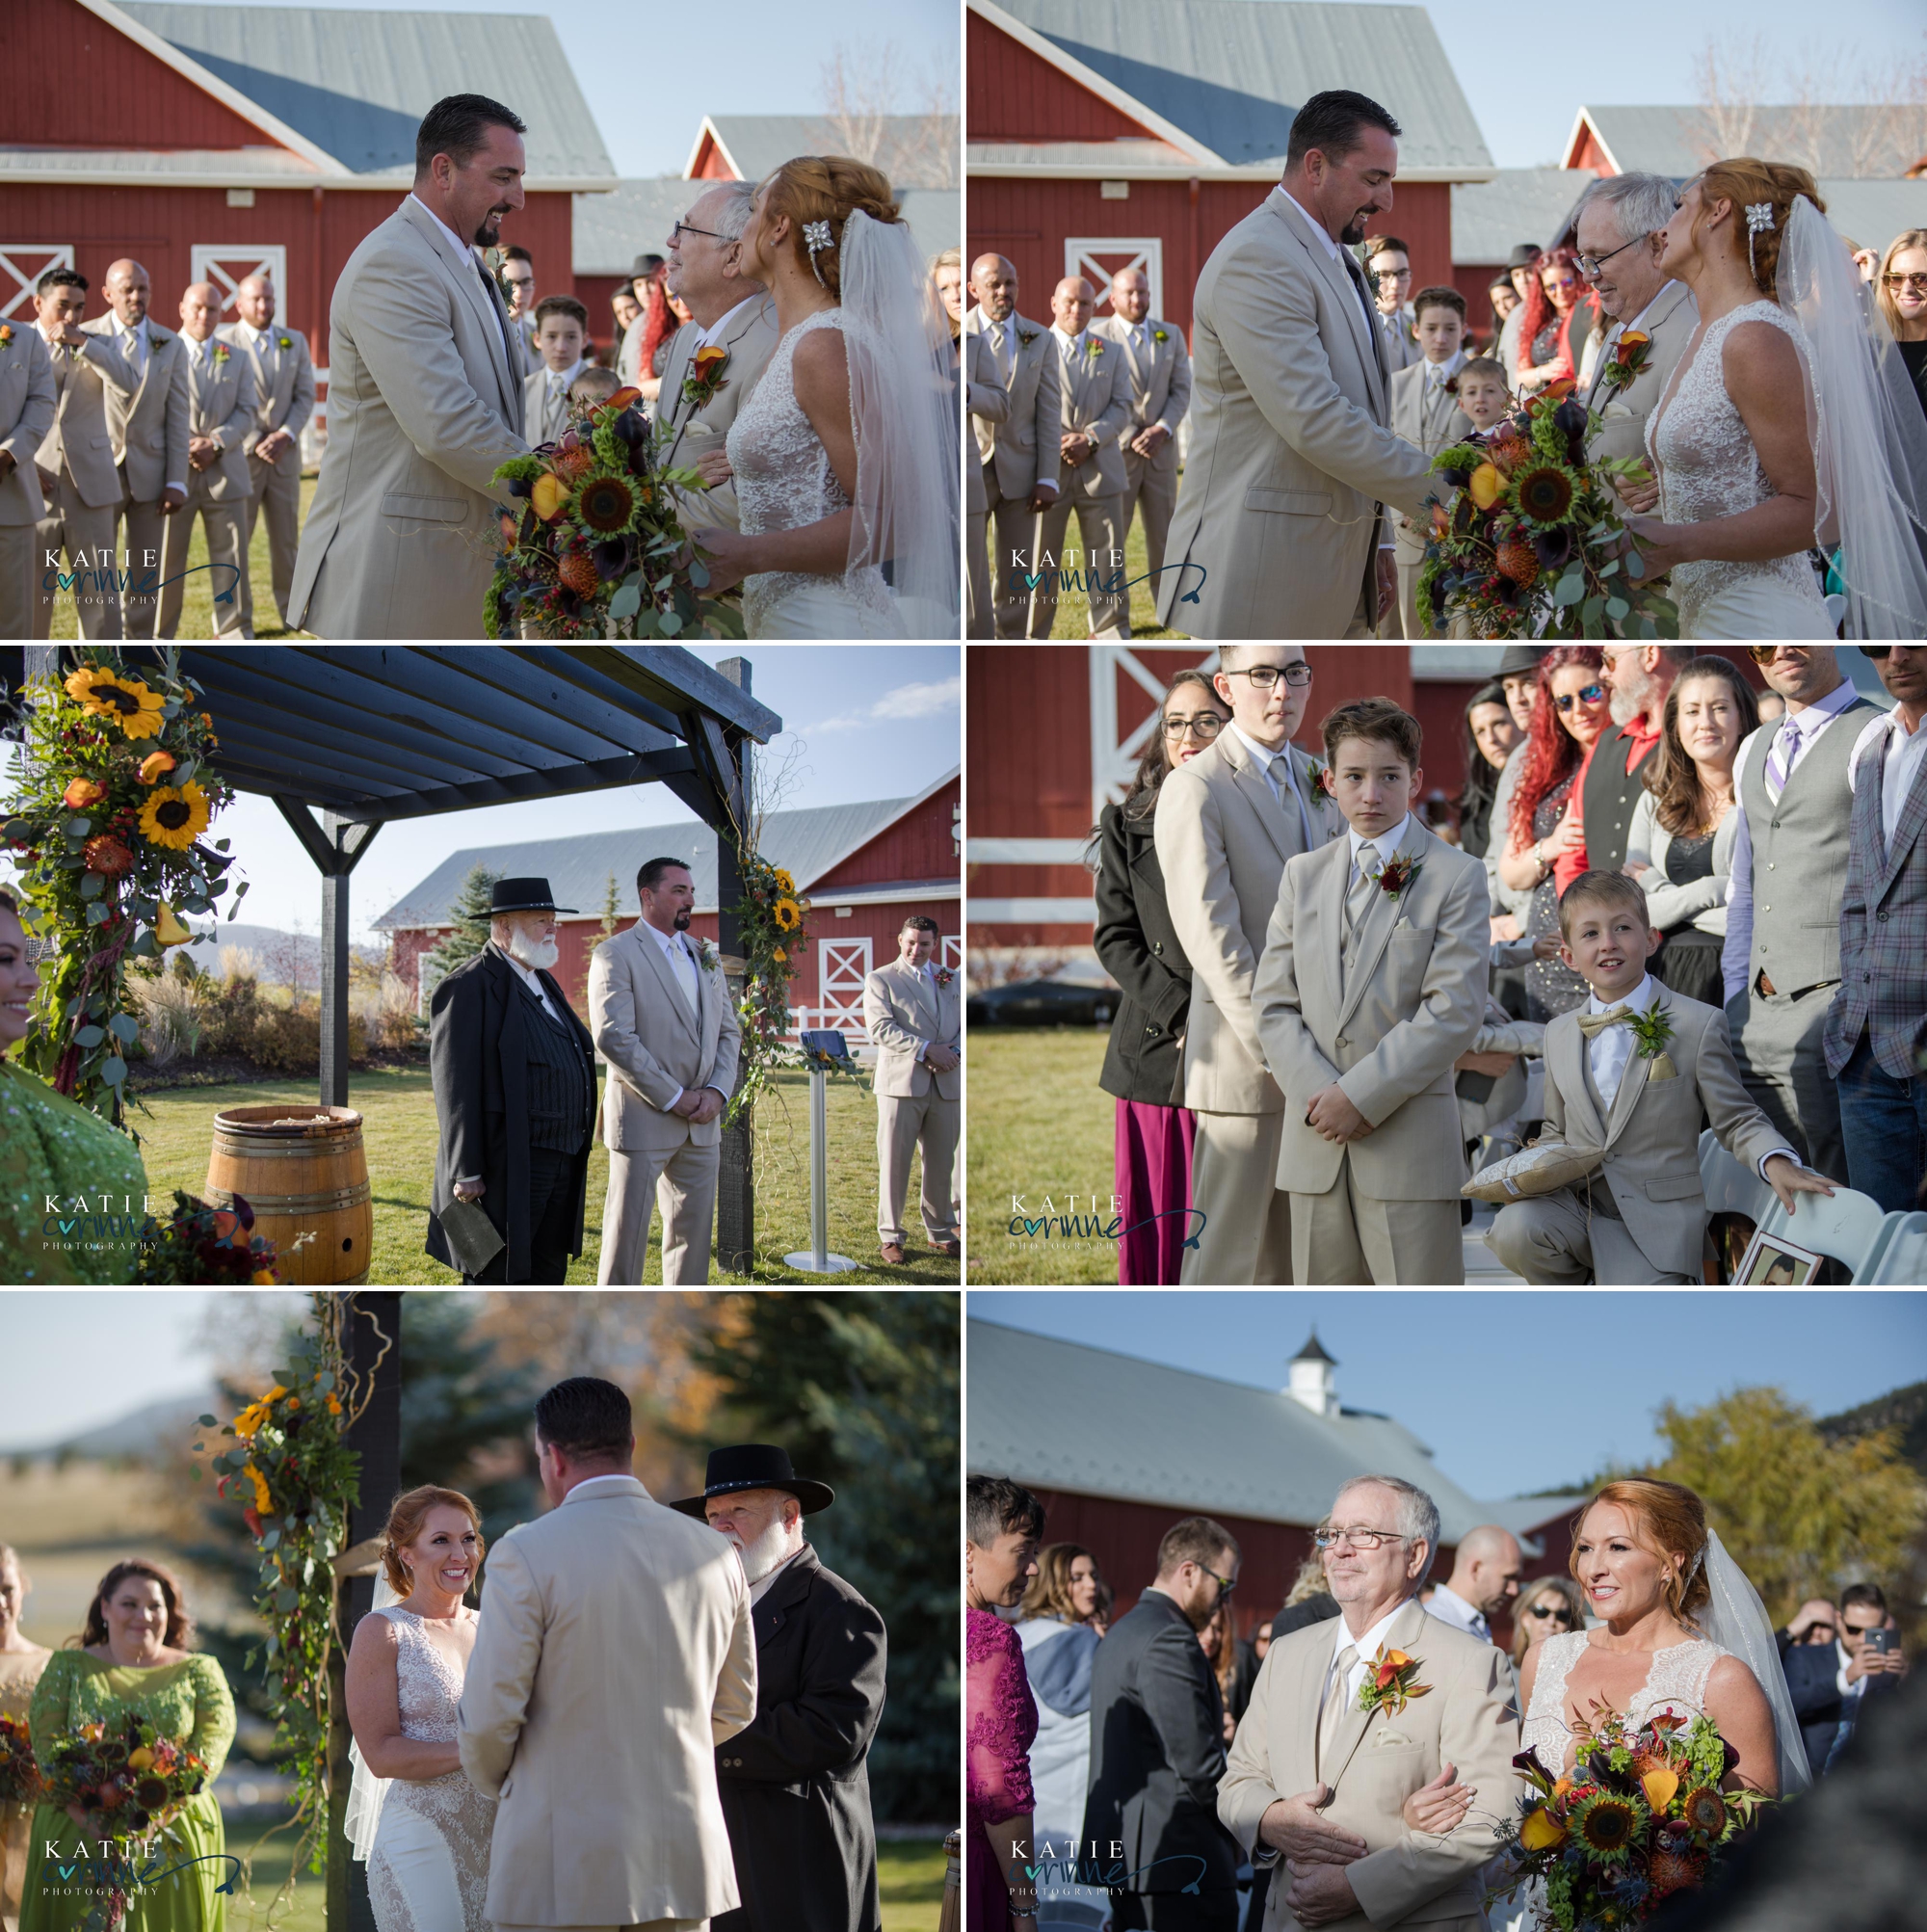 Father of bride gives away gbride to groom at wedding ceremony